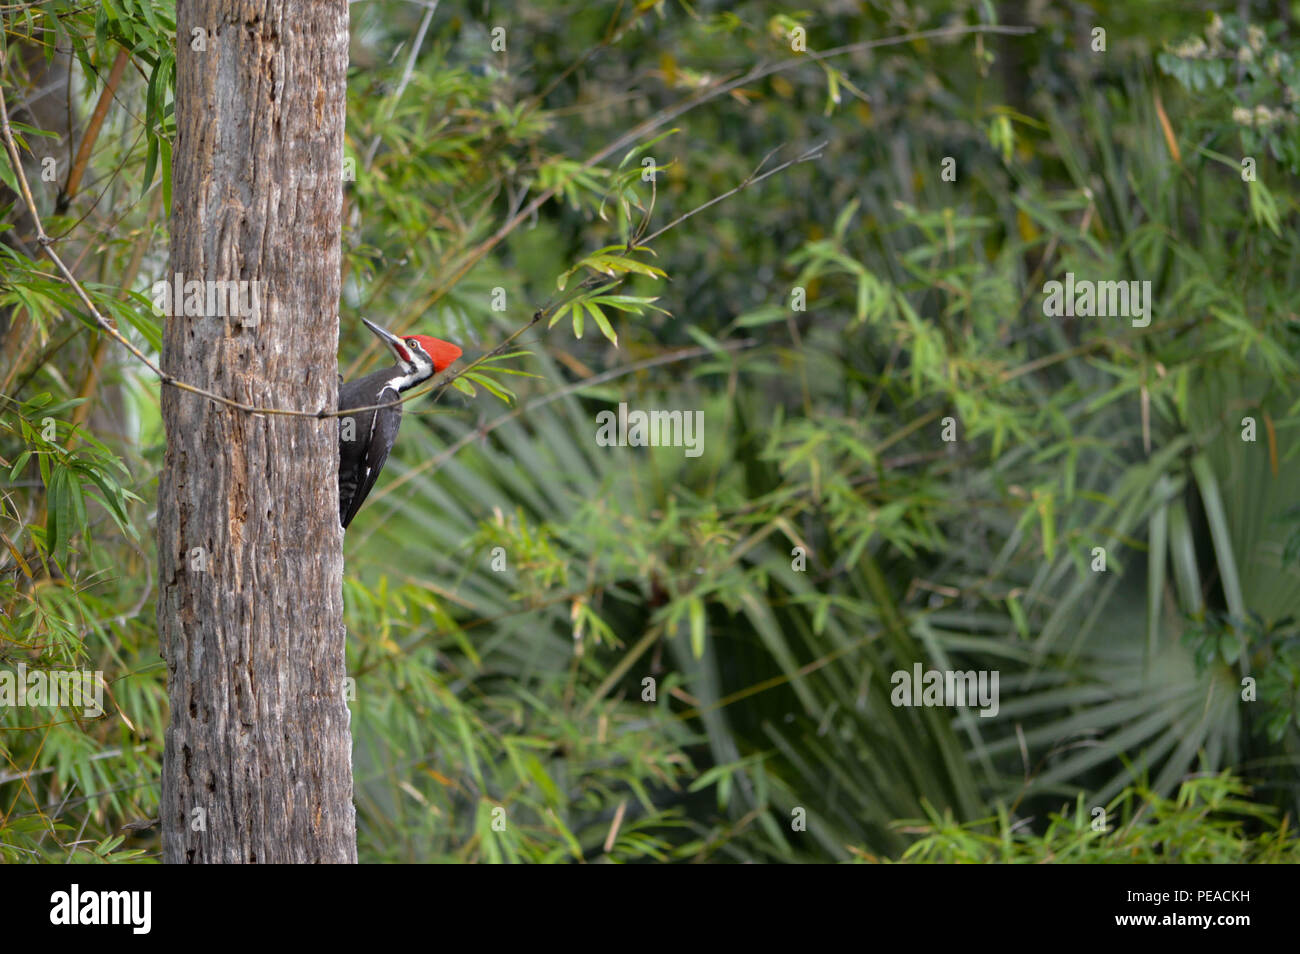 Birding Ornithology Birdwatching Stricking Male Pileated Woodpecker Side Profile View Perched Tree Trunk Largest Common Woodpecker In North America Stock Photo